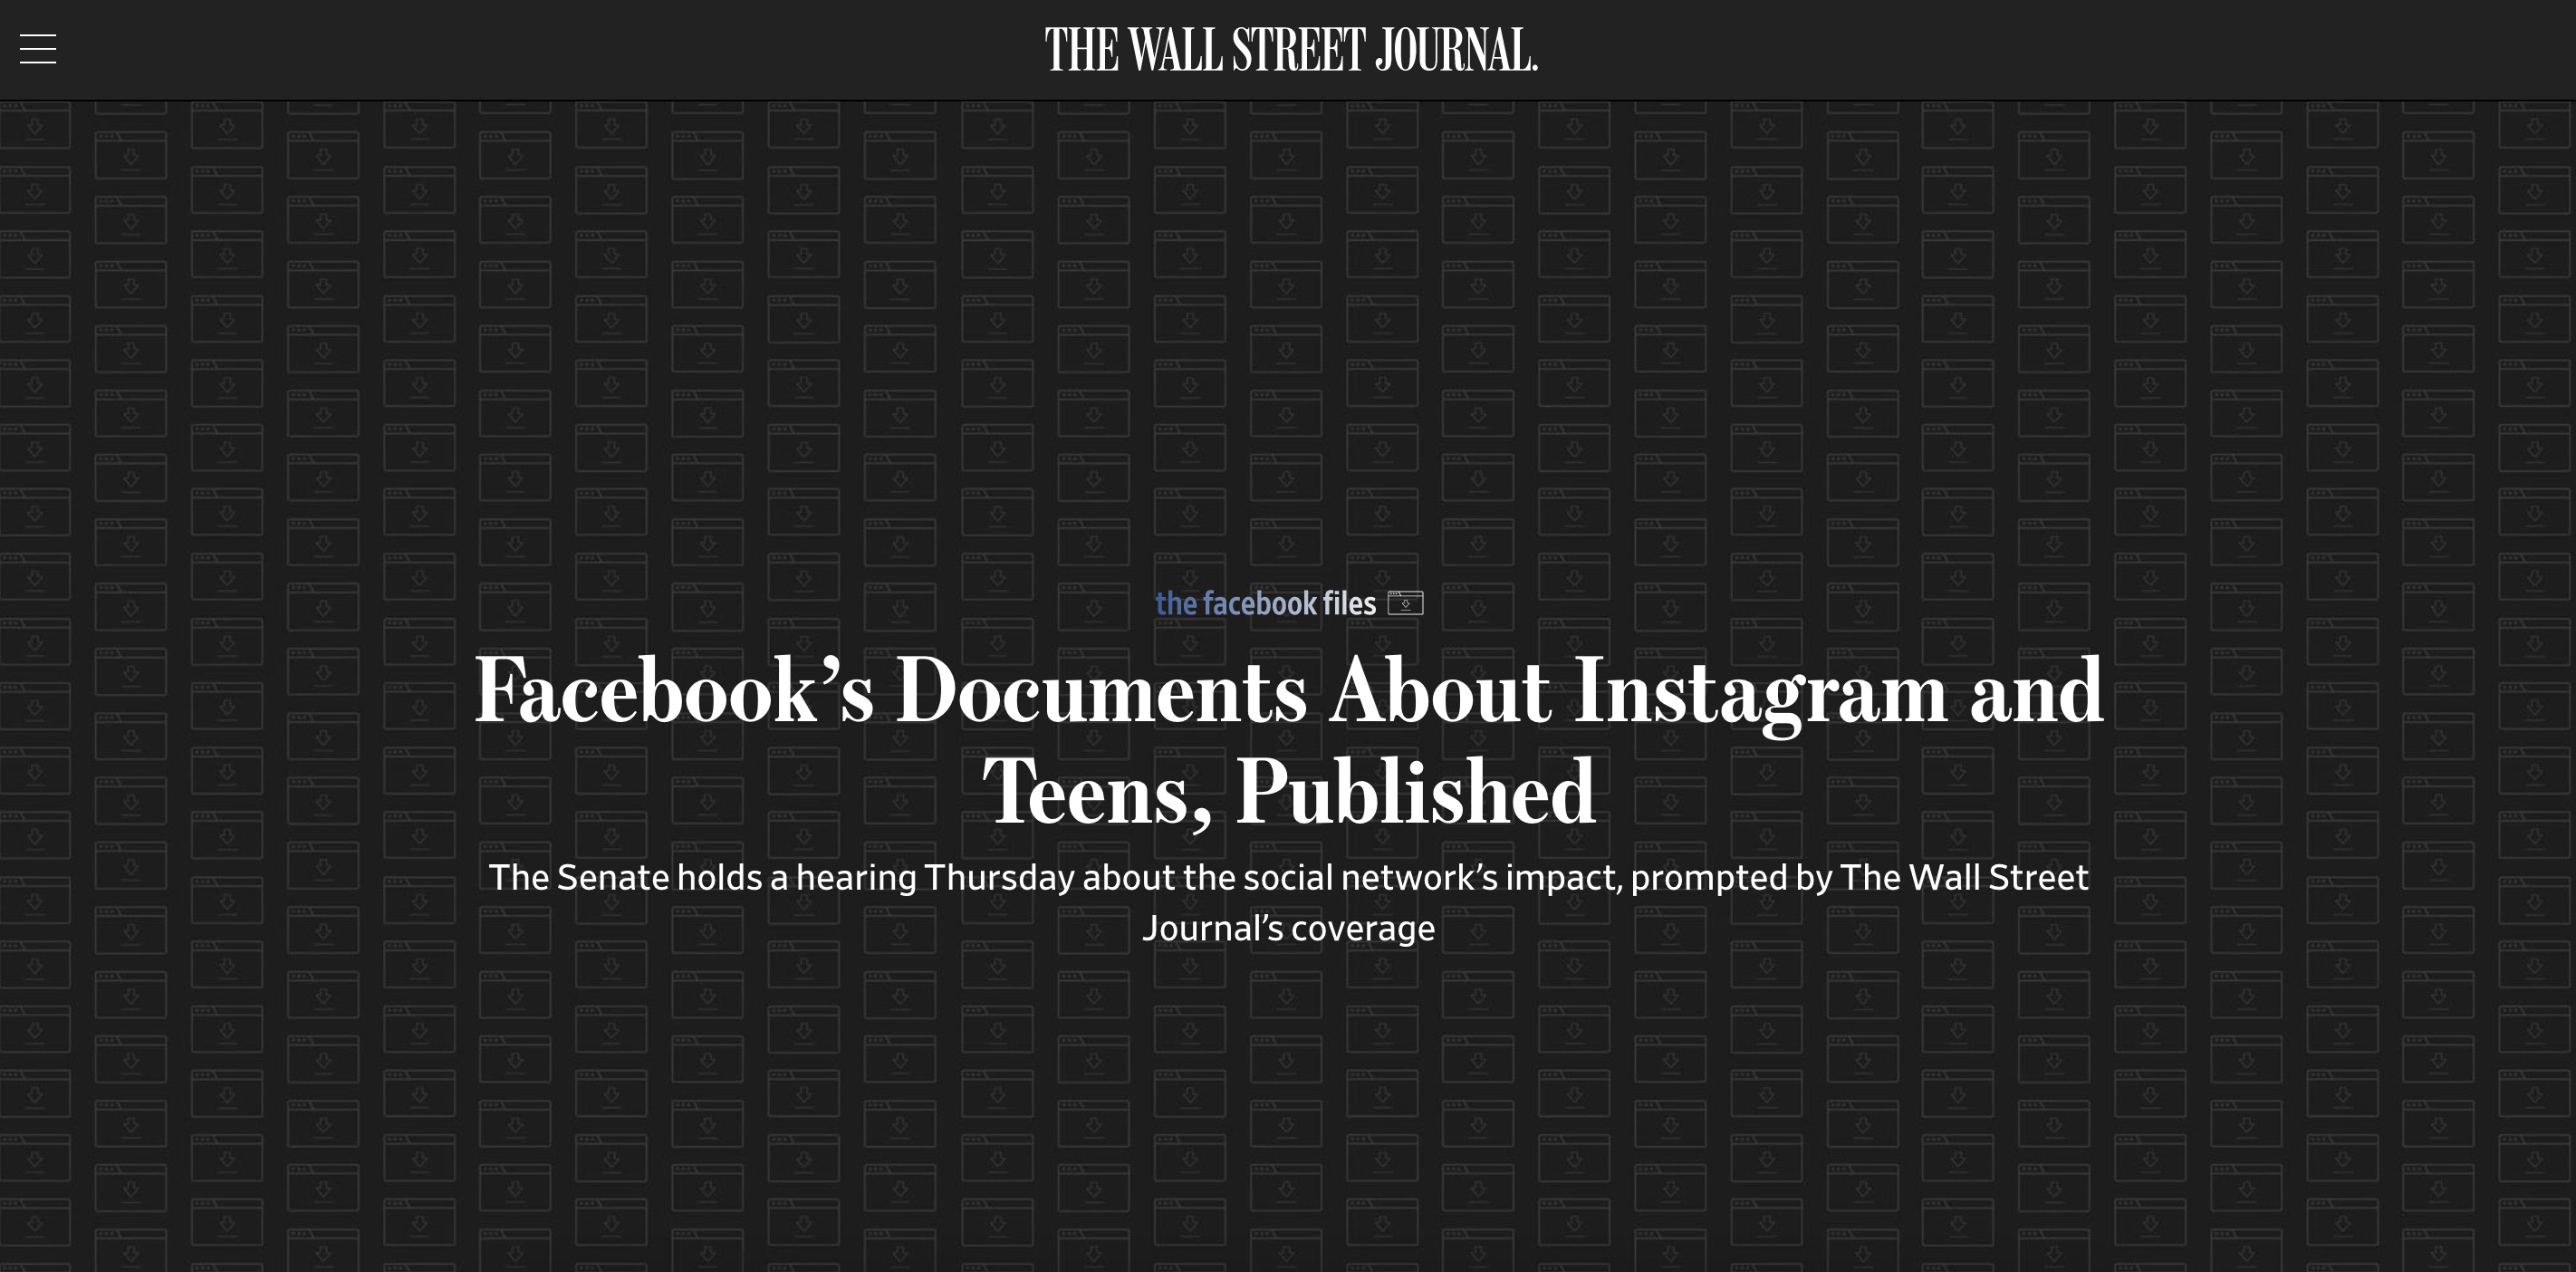 On The Wall Street Journal: Facebook’s Documents About Instagram and Teens, Published